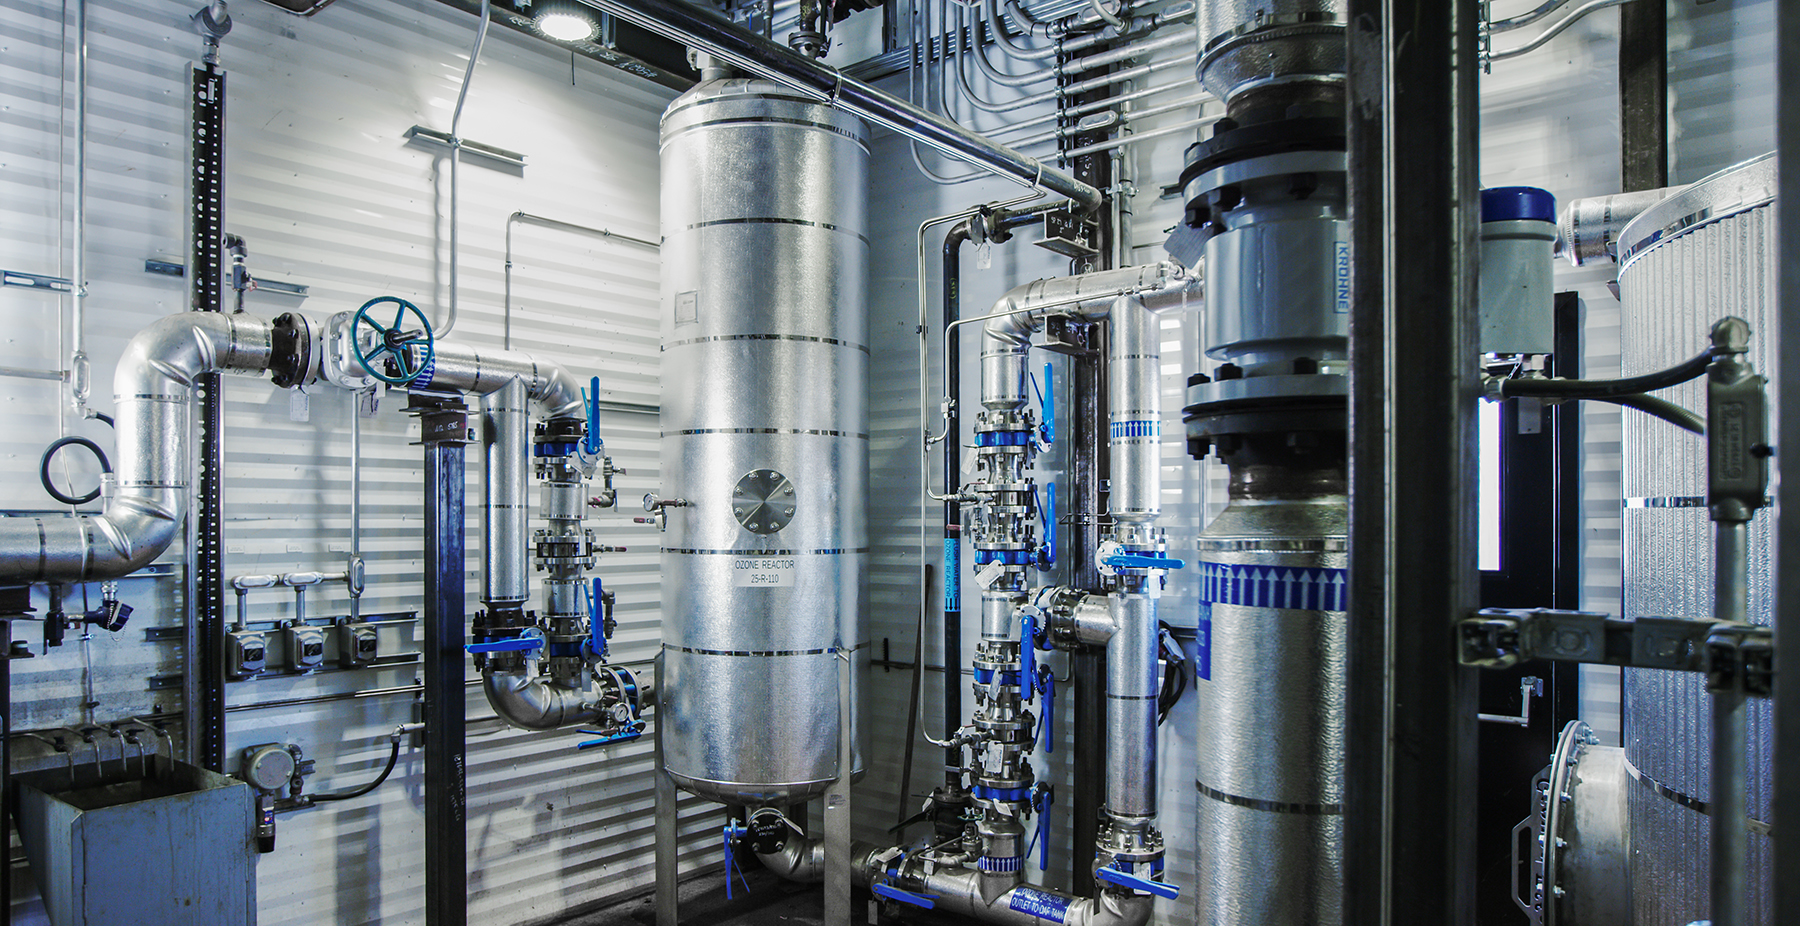 At its testing facility in Regina, Saskatchewan, Volt Lithium uses this equipment to treat oil field brine before it enters the company’s direct lithium extraction process. (Image courtesy of Greg Huszar/Volt Lithium)